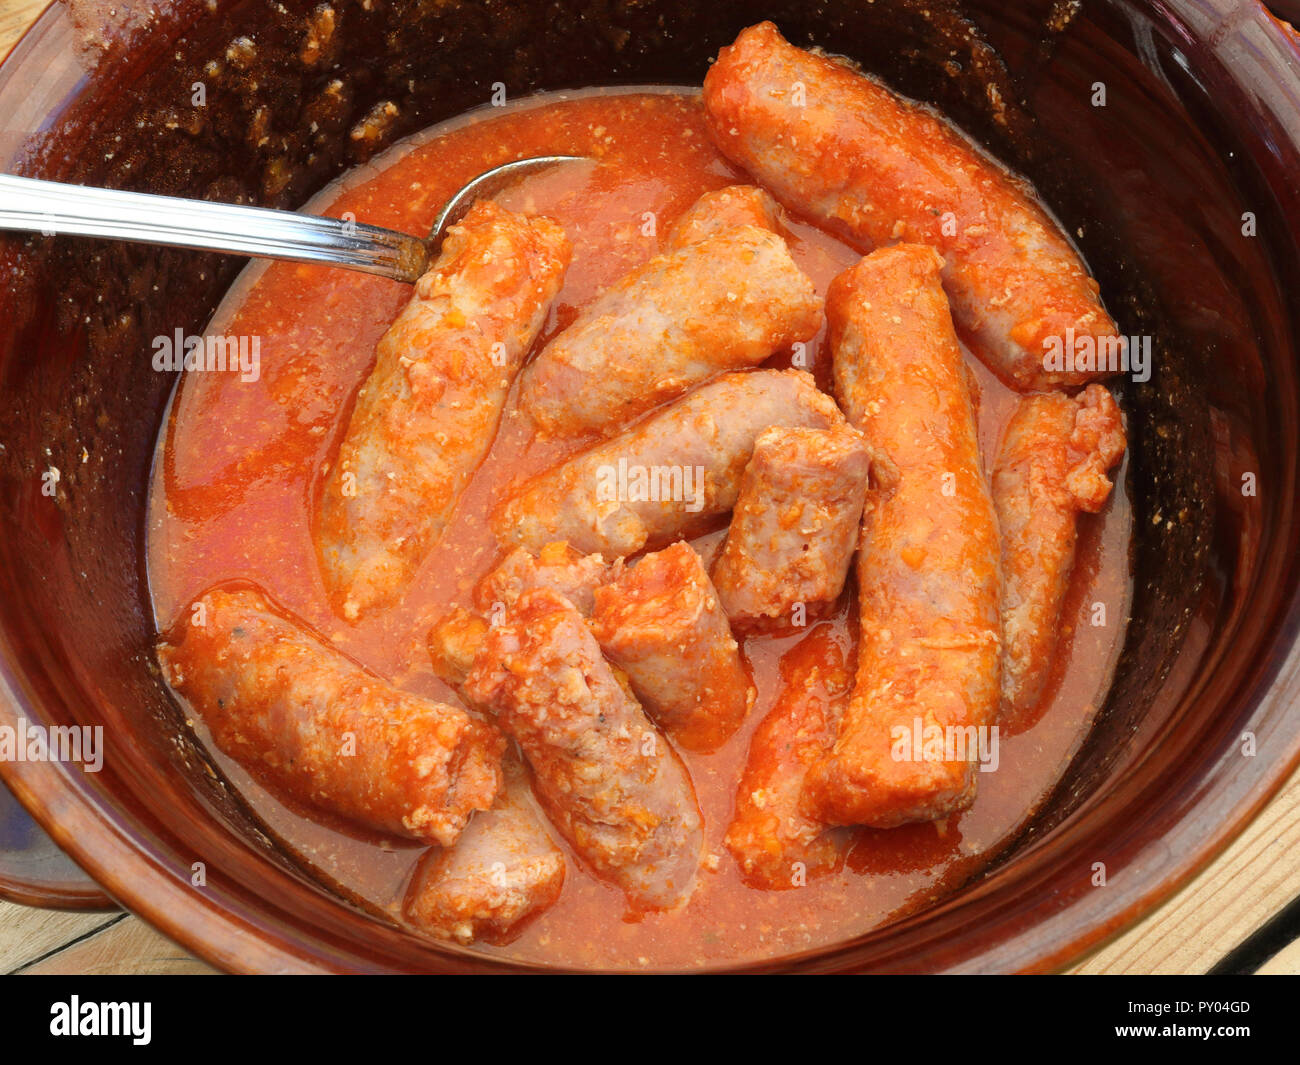 A brown bowl on a wooden table with a spoon containing a homemade sausages stew in spices and tomato sauce to eat with polenta, a typical Italian dish Stock Photo